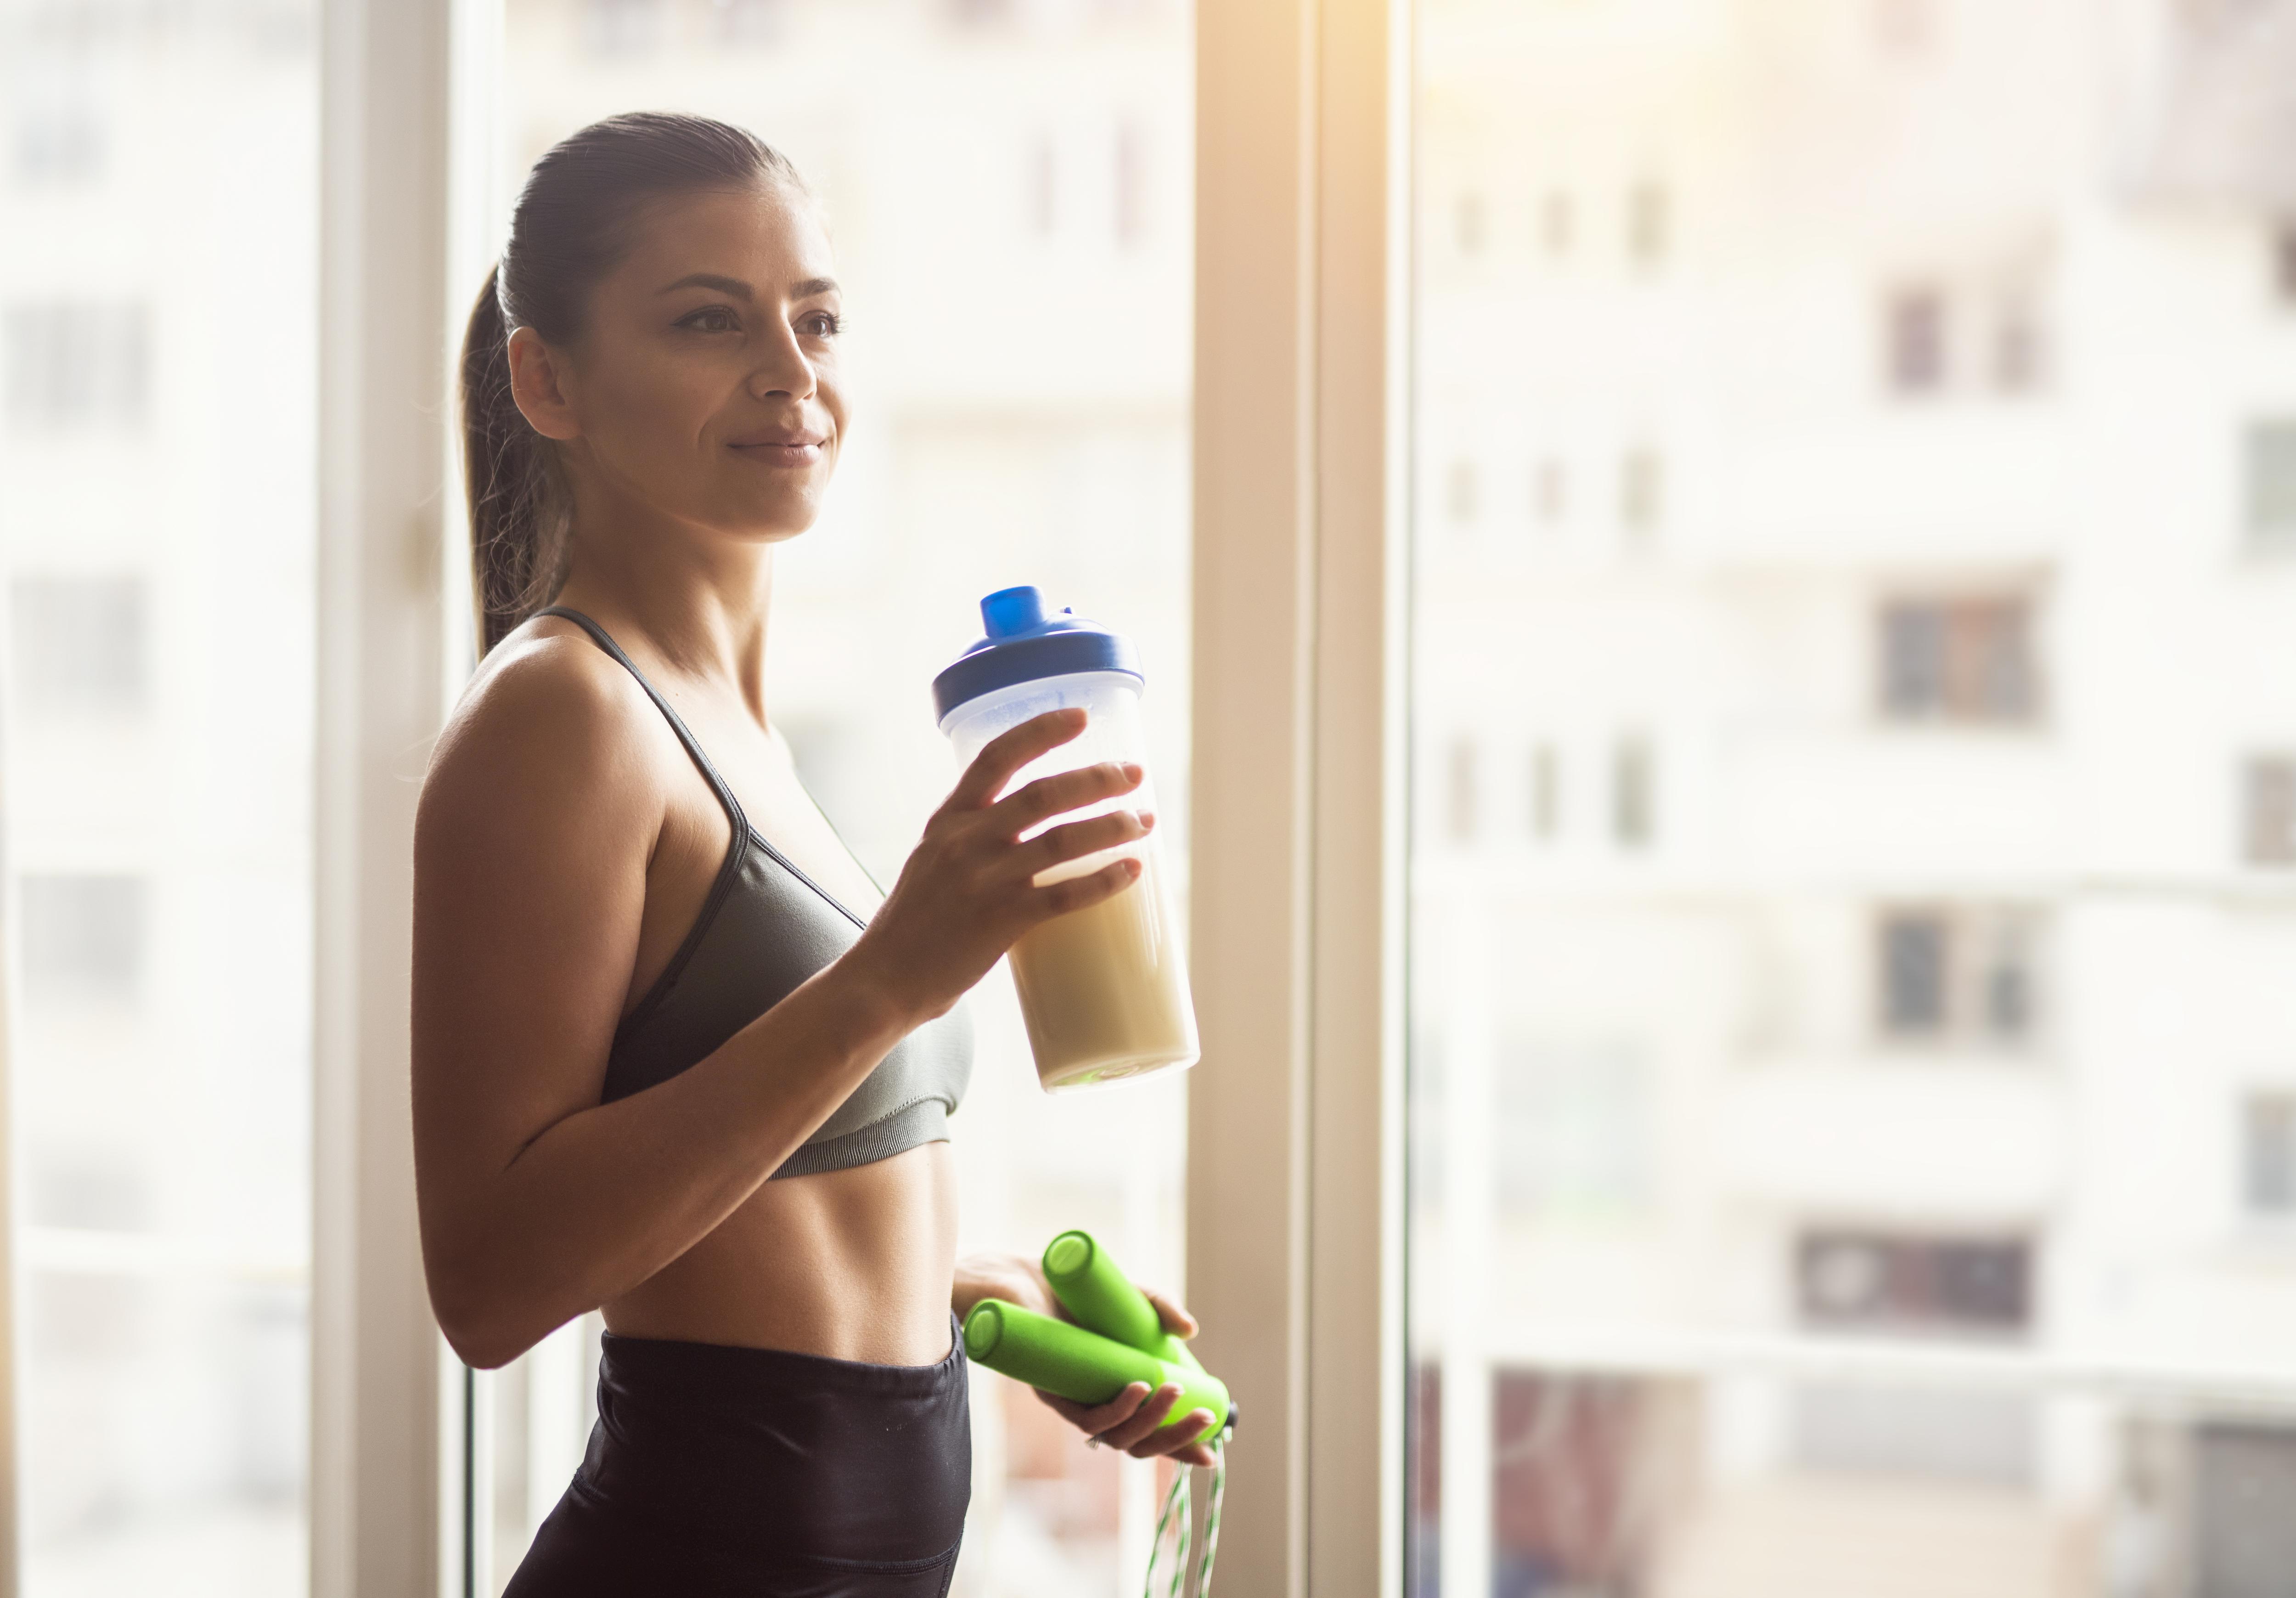 Calorad for Weight Loss: The 10 Surprising Benefits You Must Know